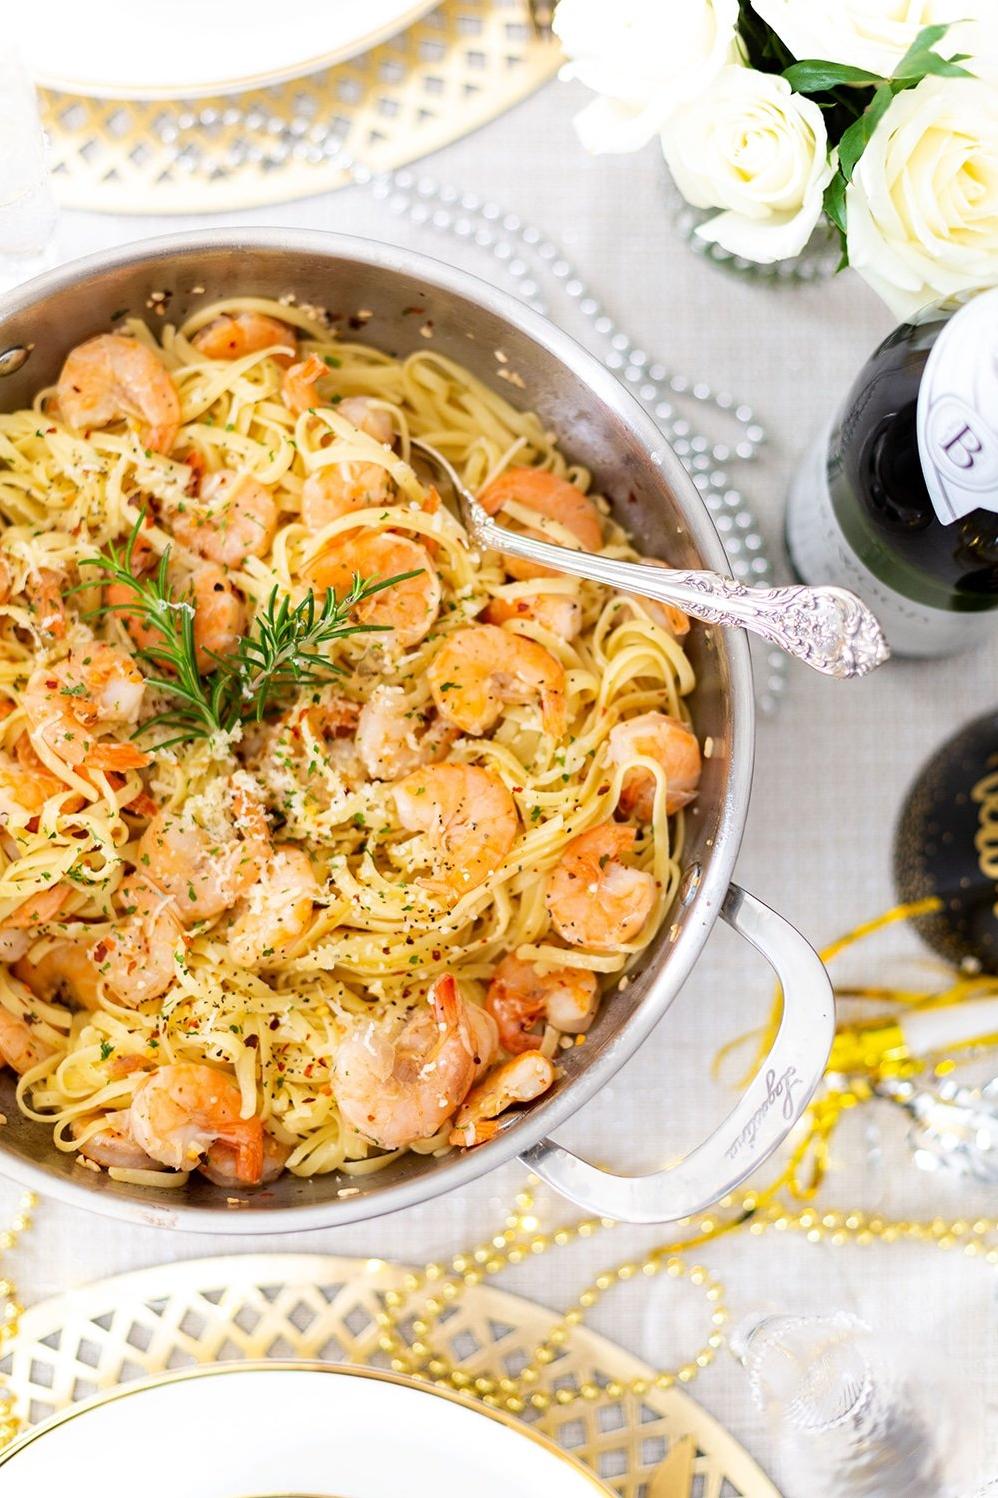  A match made in culinary heaven: juicy shrimp, pasta, and a rich champagne sauce.